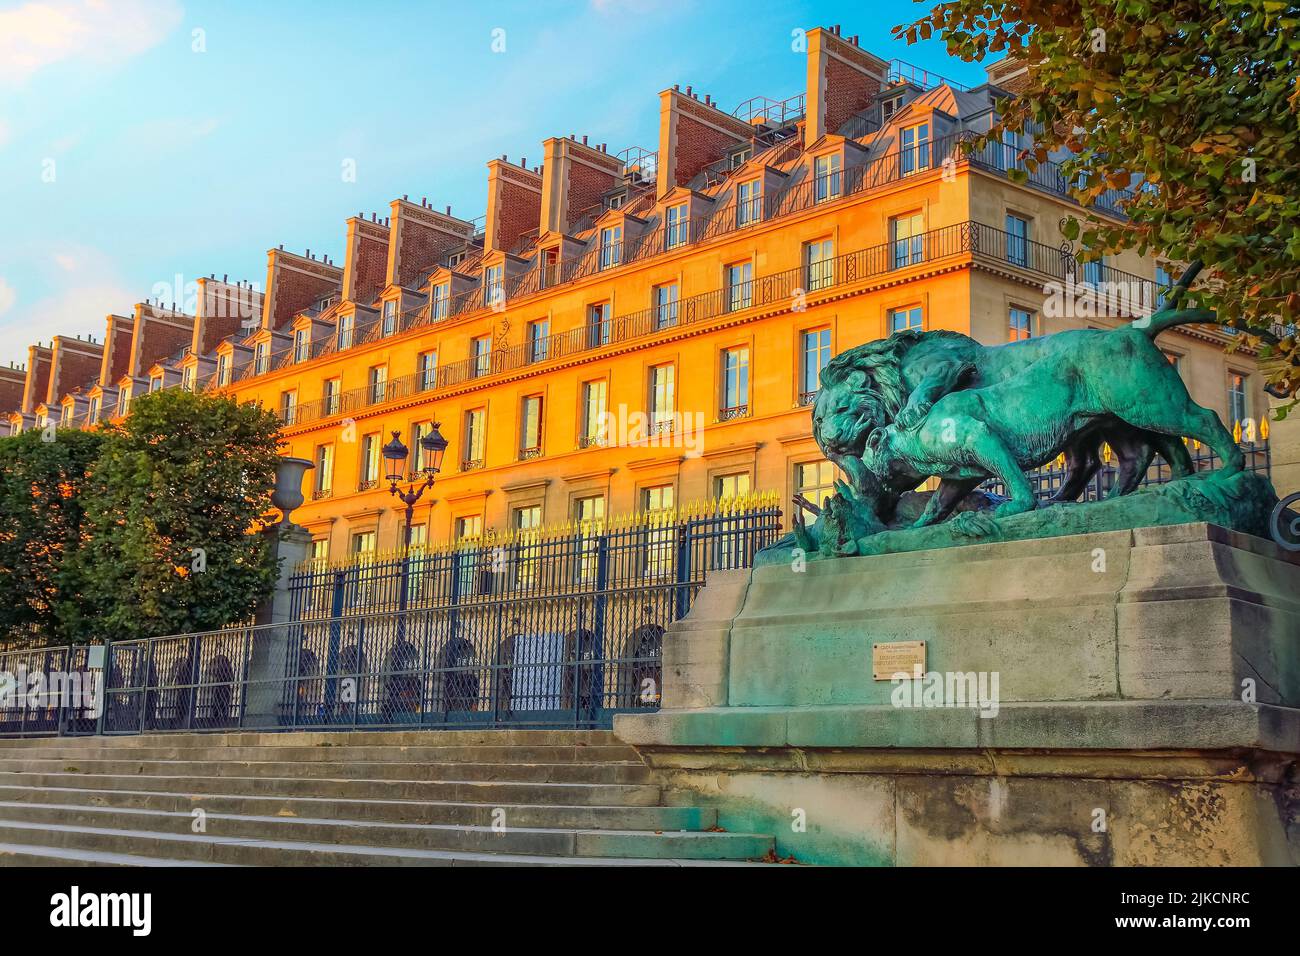 Lion statue and entrace gate to Tuileries gardens in Paris, France Stock Photo